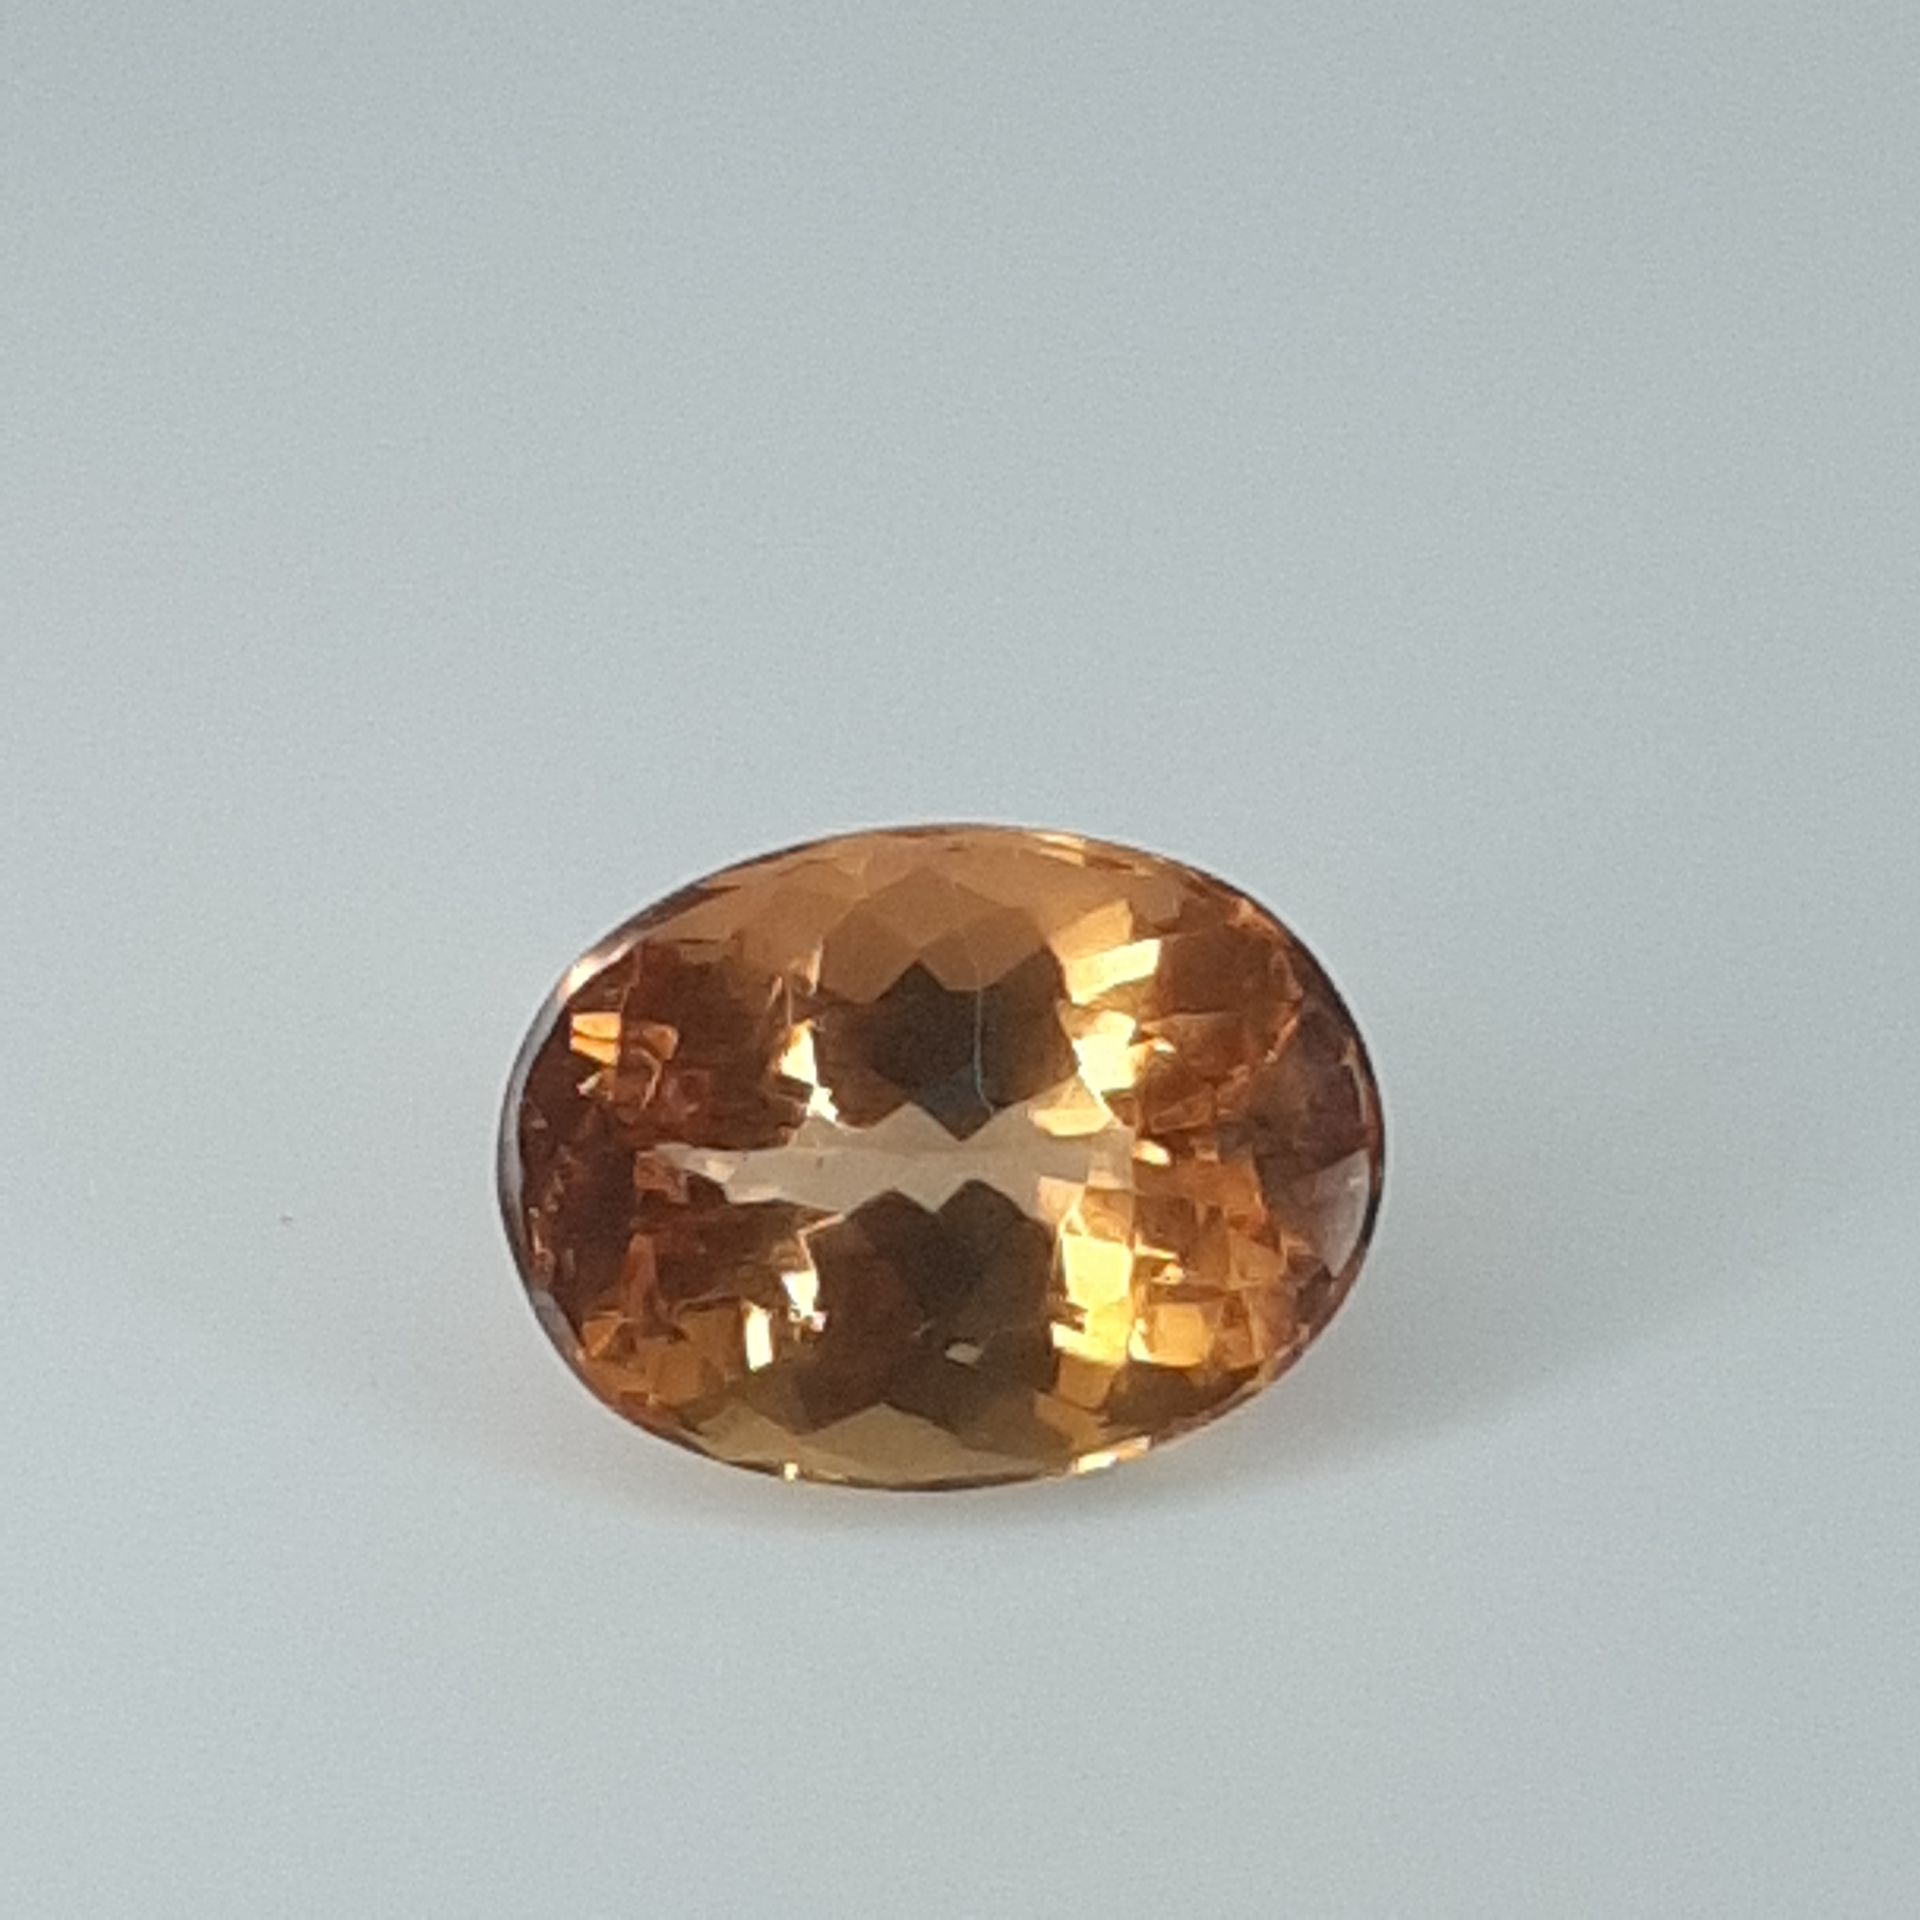 Topaze impériale - BRESIL - 4.15 cts IMPERIAL TOPAZE - From Brazil Ouro Preto - &hellip;